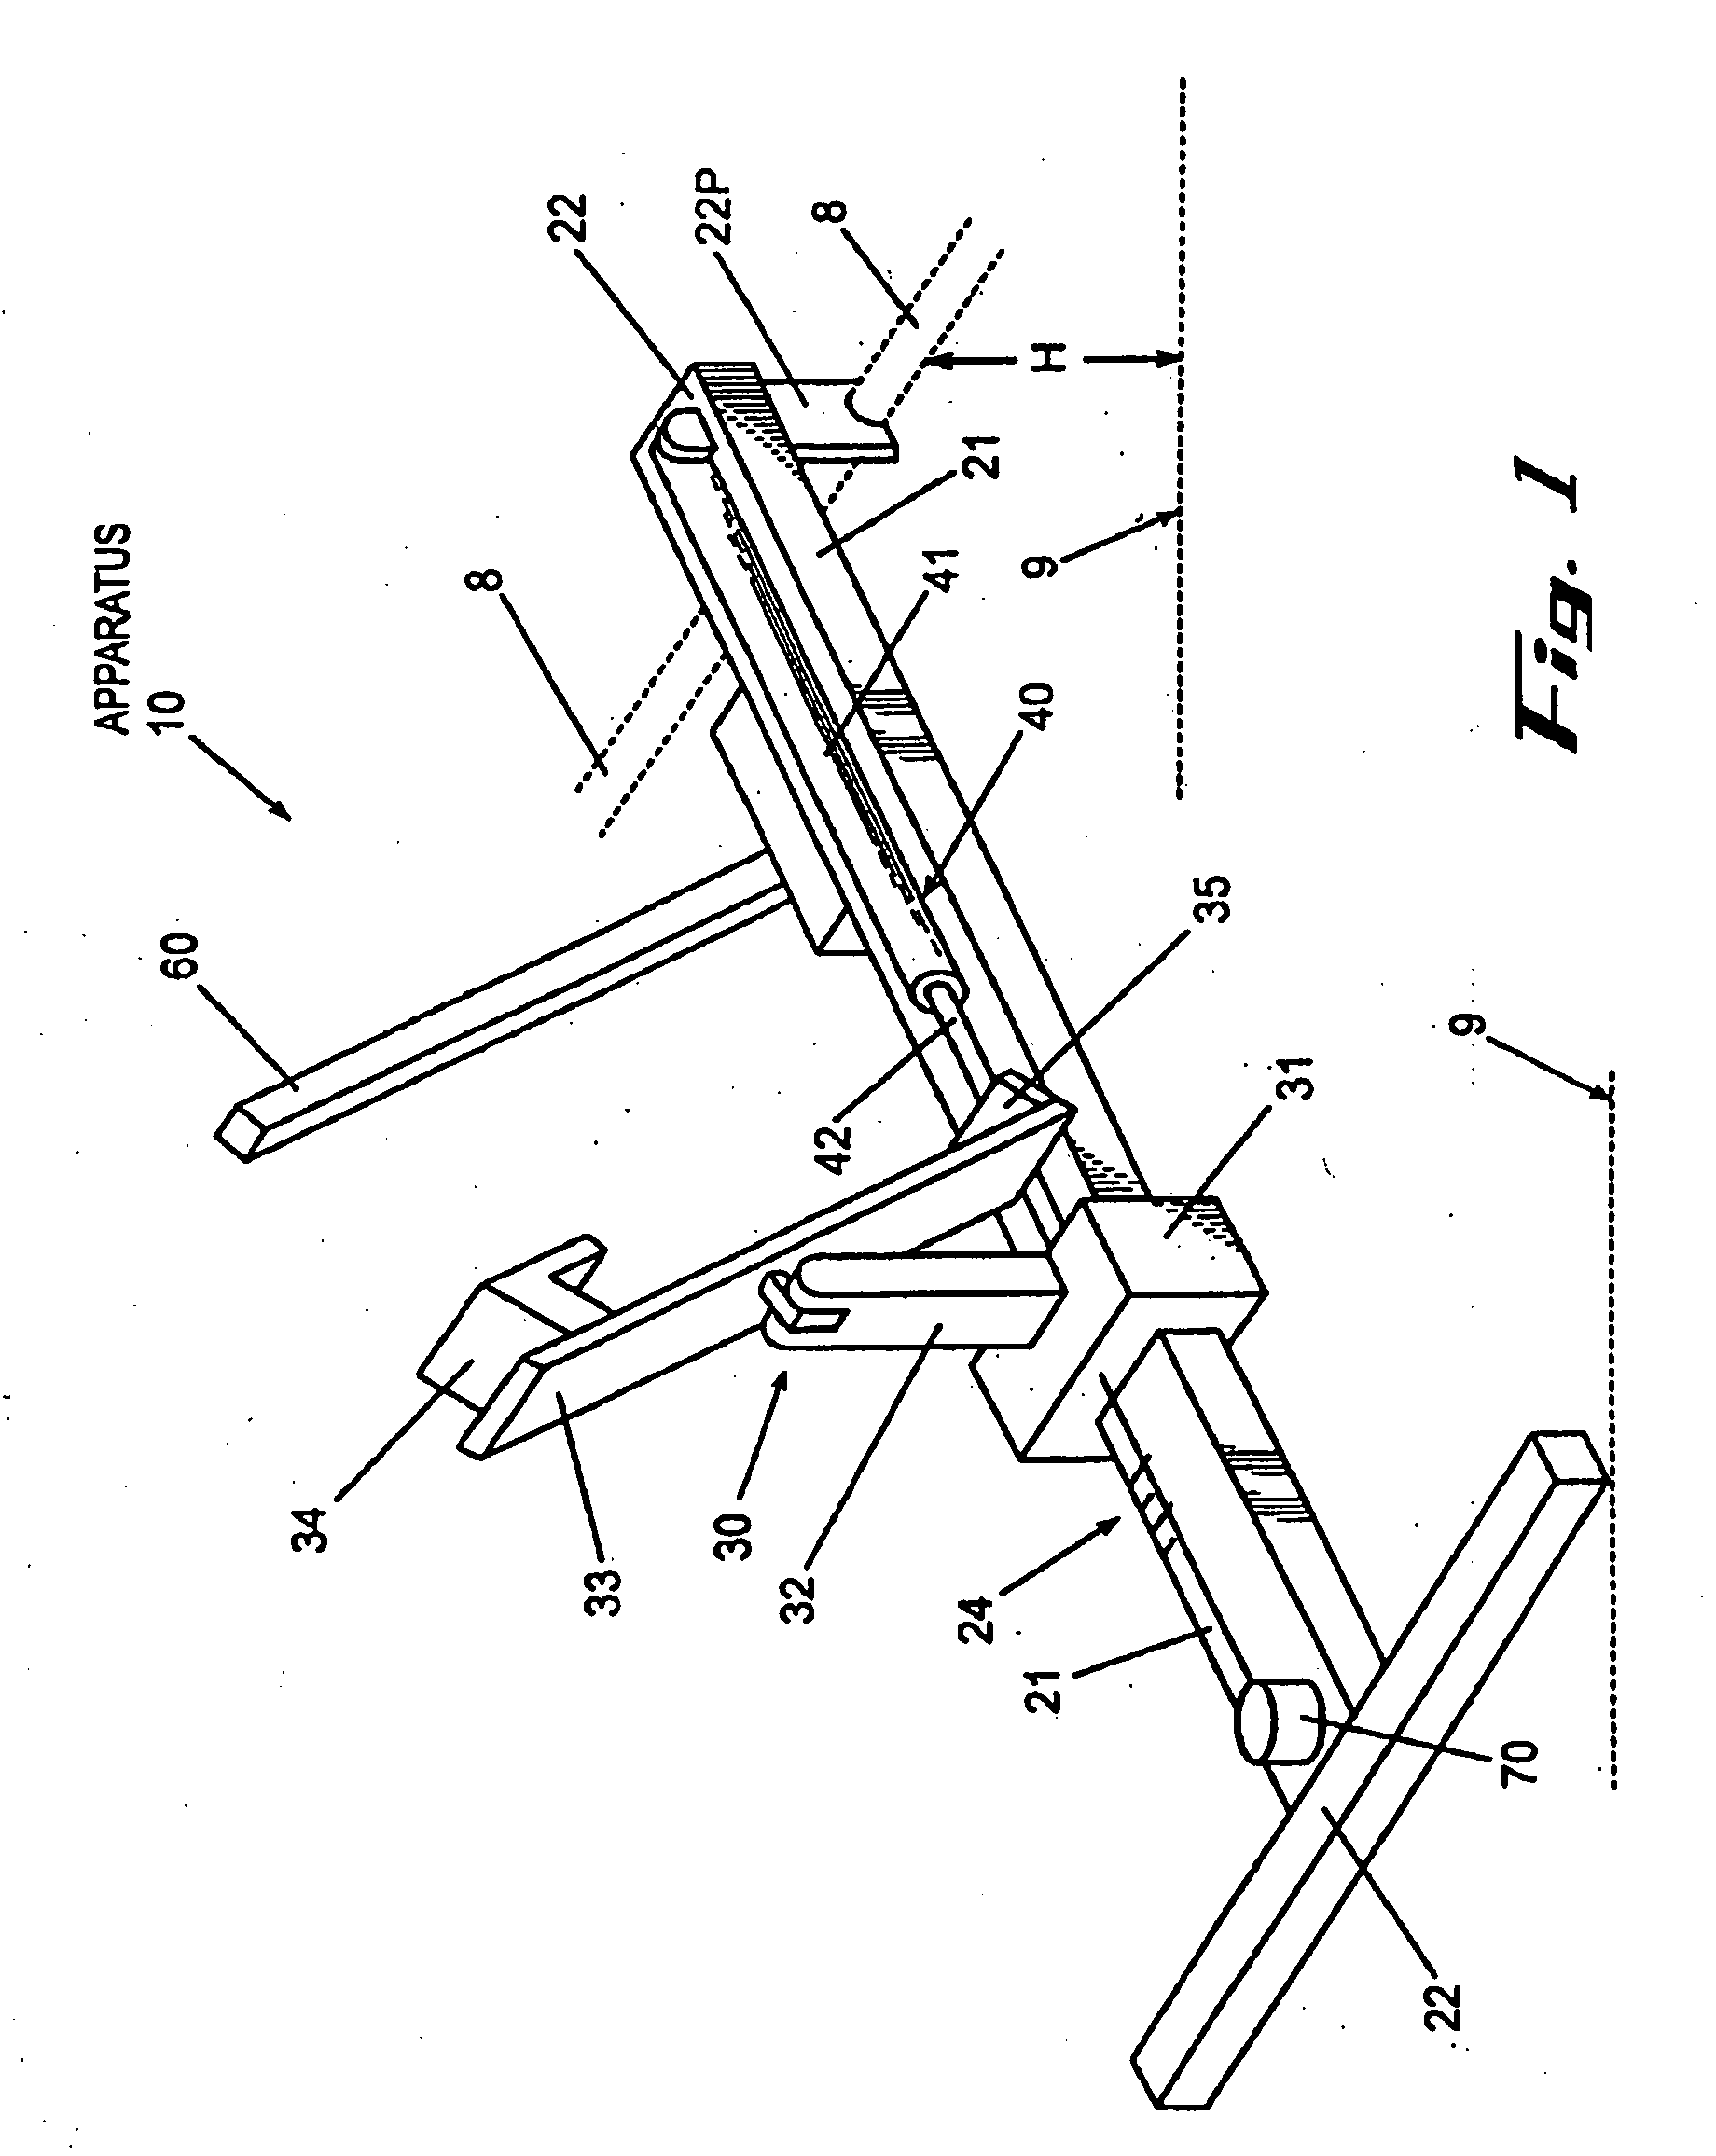 Method and apparatus for enabling and monitoring the movement of human limbs